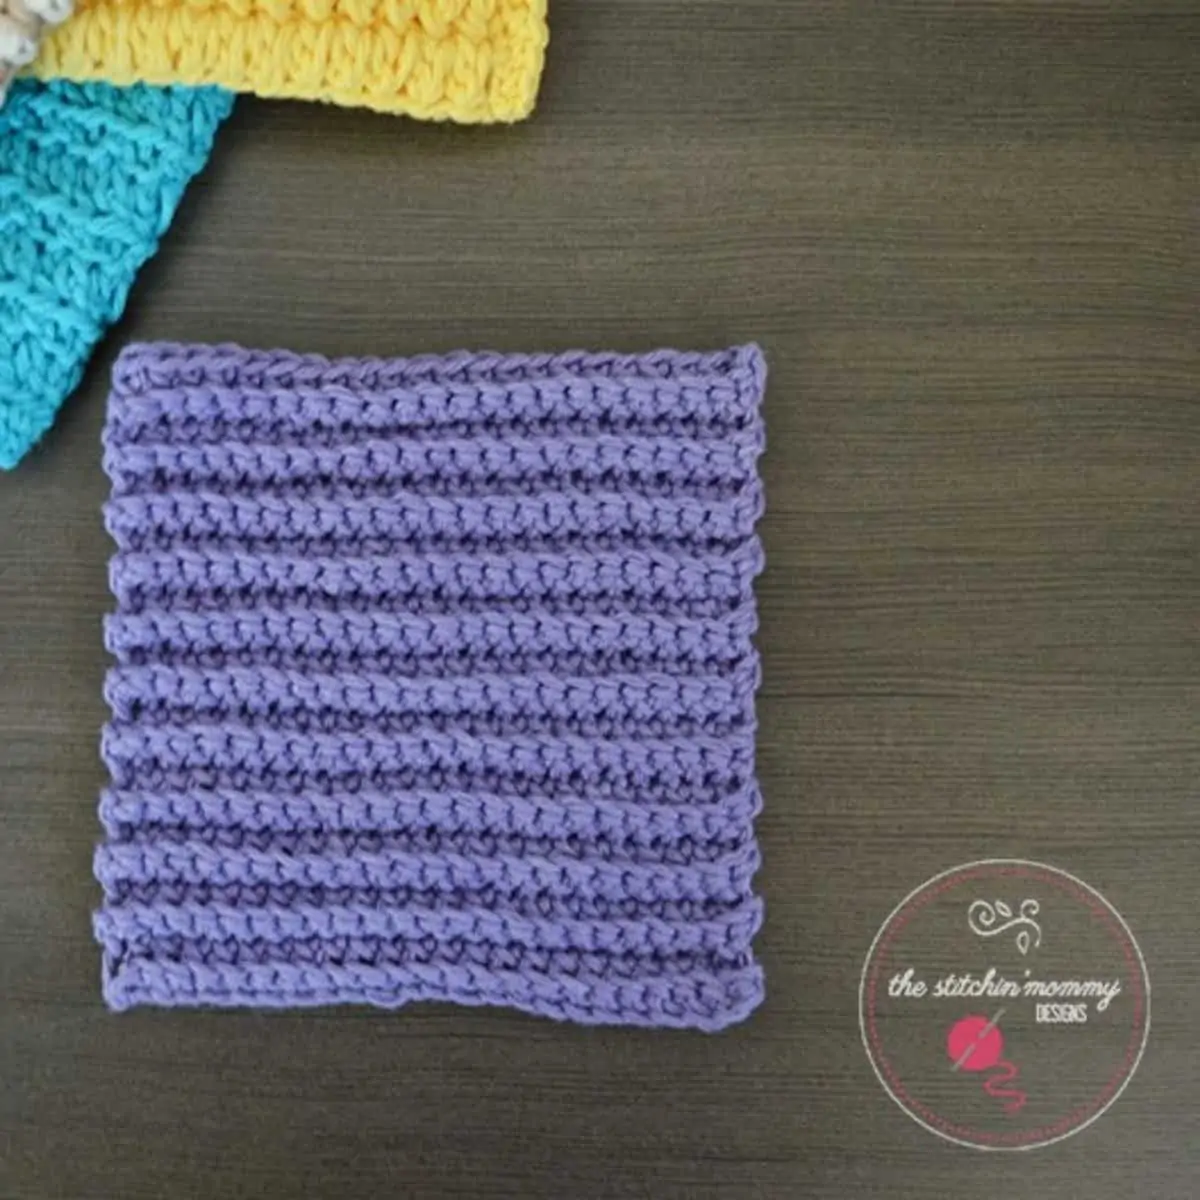 ribbed dishcloth laying flat with other dishcloths peeking from the corner